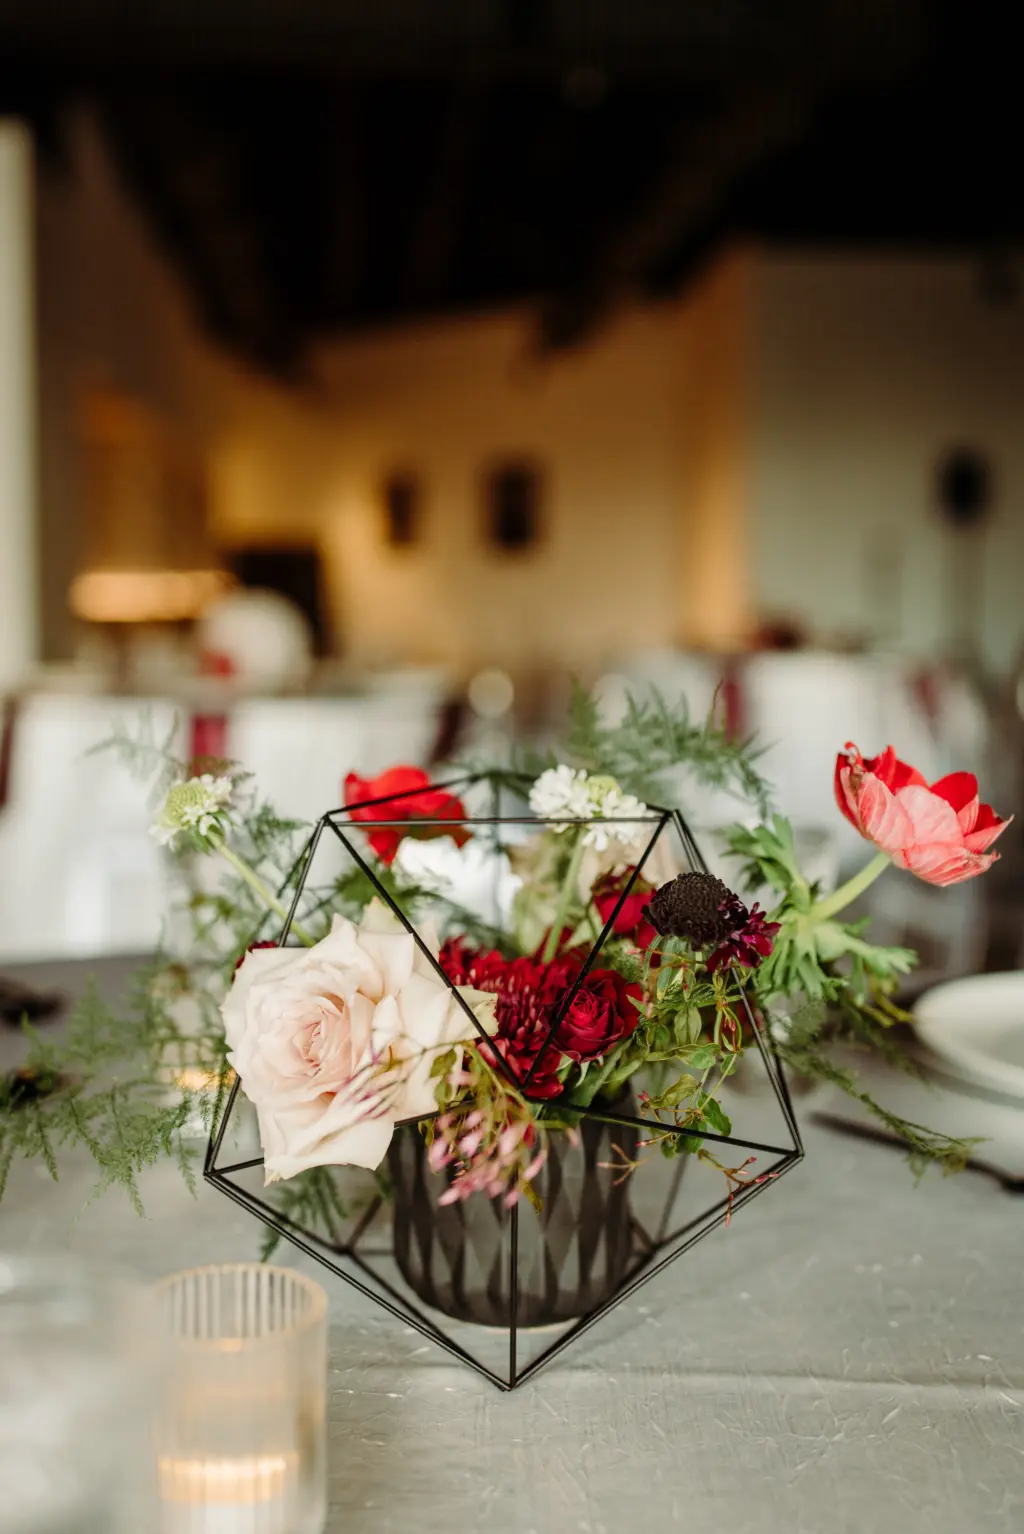 Black Geometric Centerpiece with Pink Roses, Red Carnations, and Protea | Modern Asian Wedding Reception Inspiration Ideas